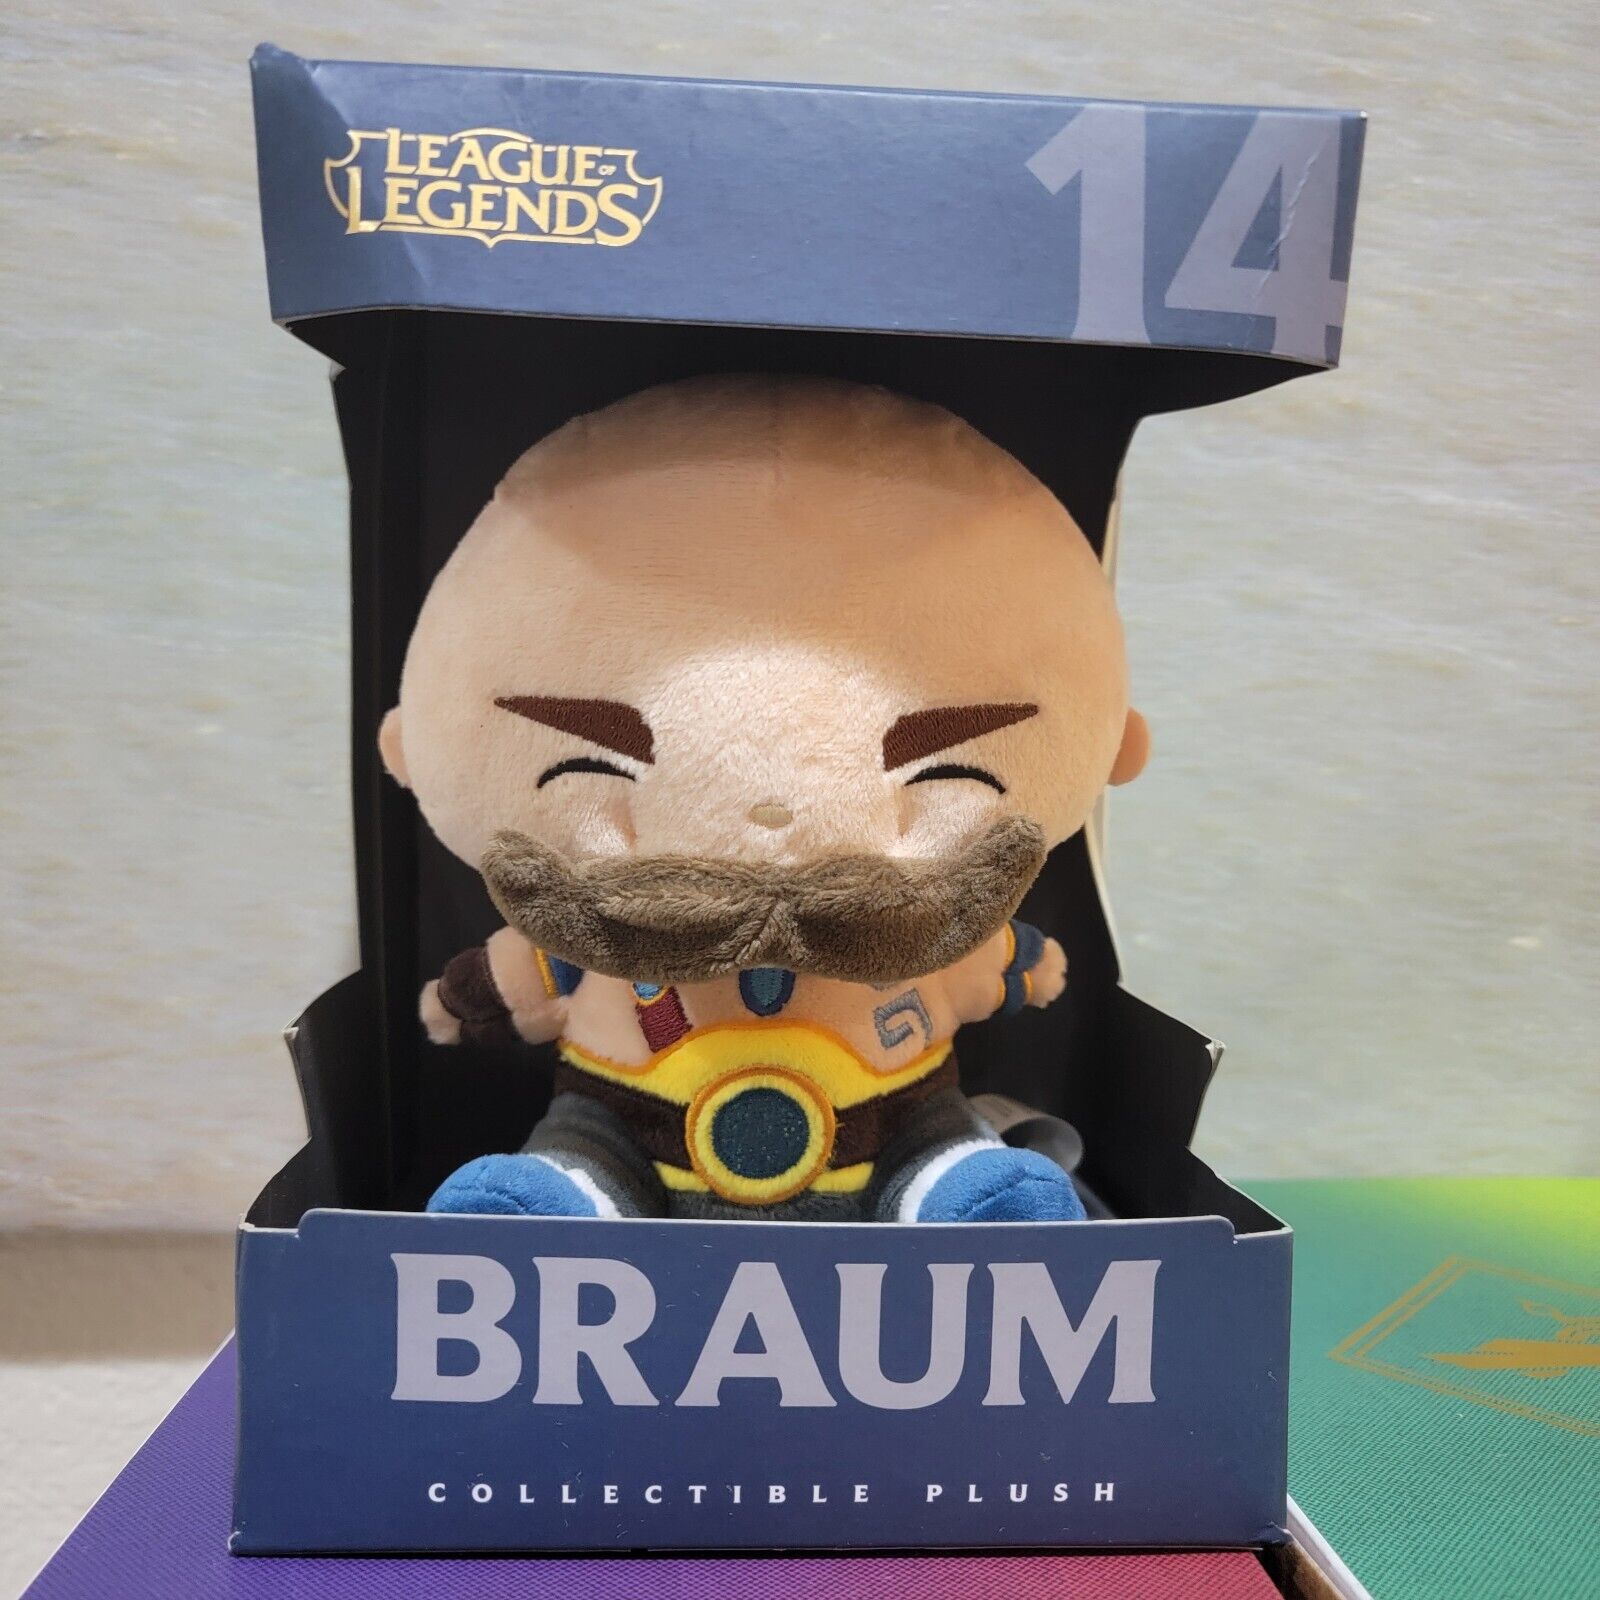 Retired Braum Collectible Plush League of Legends official